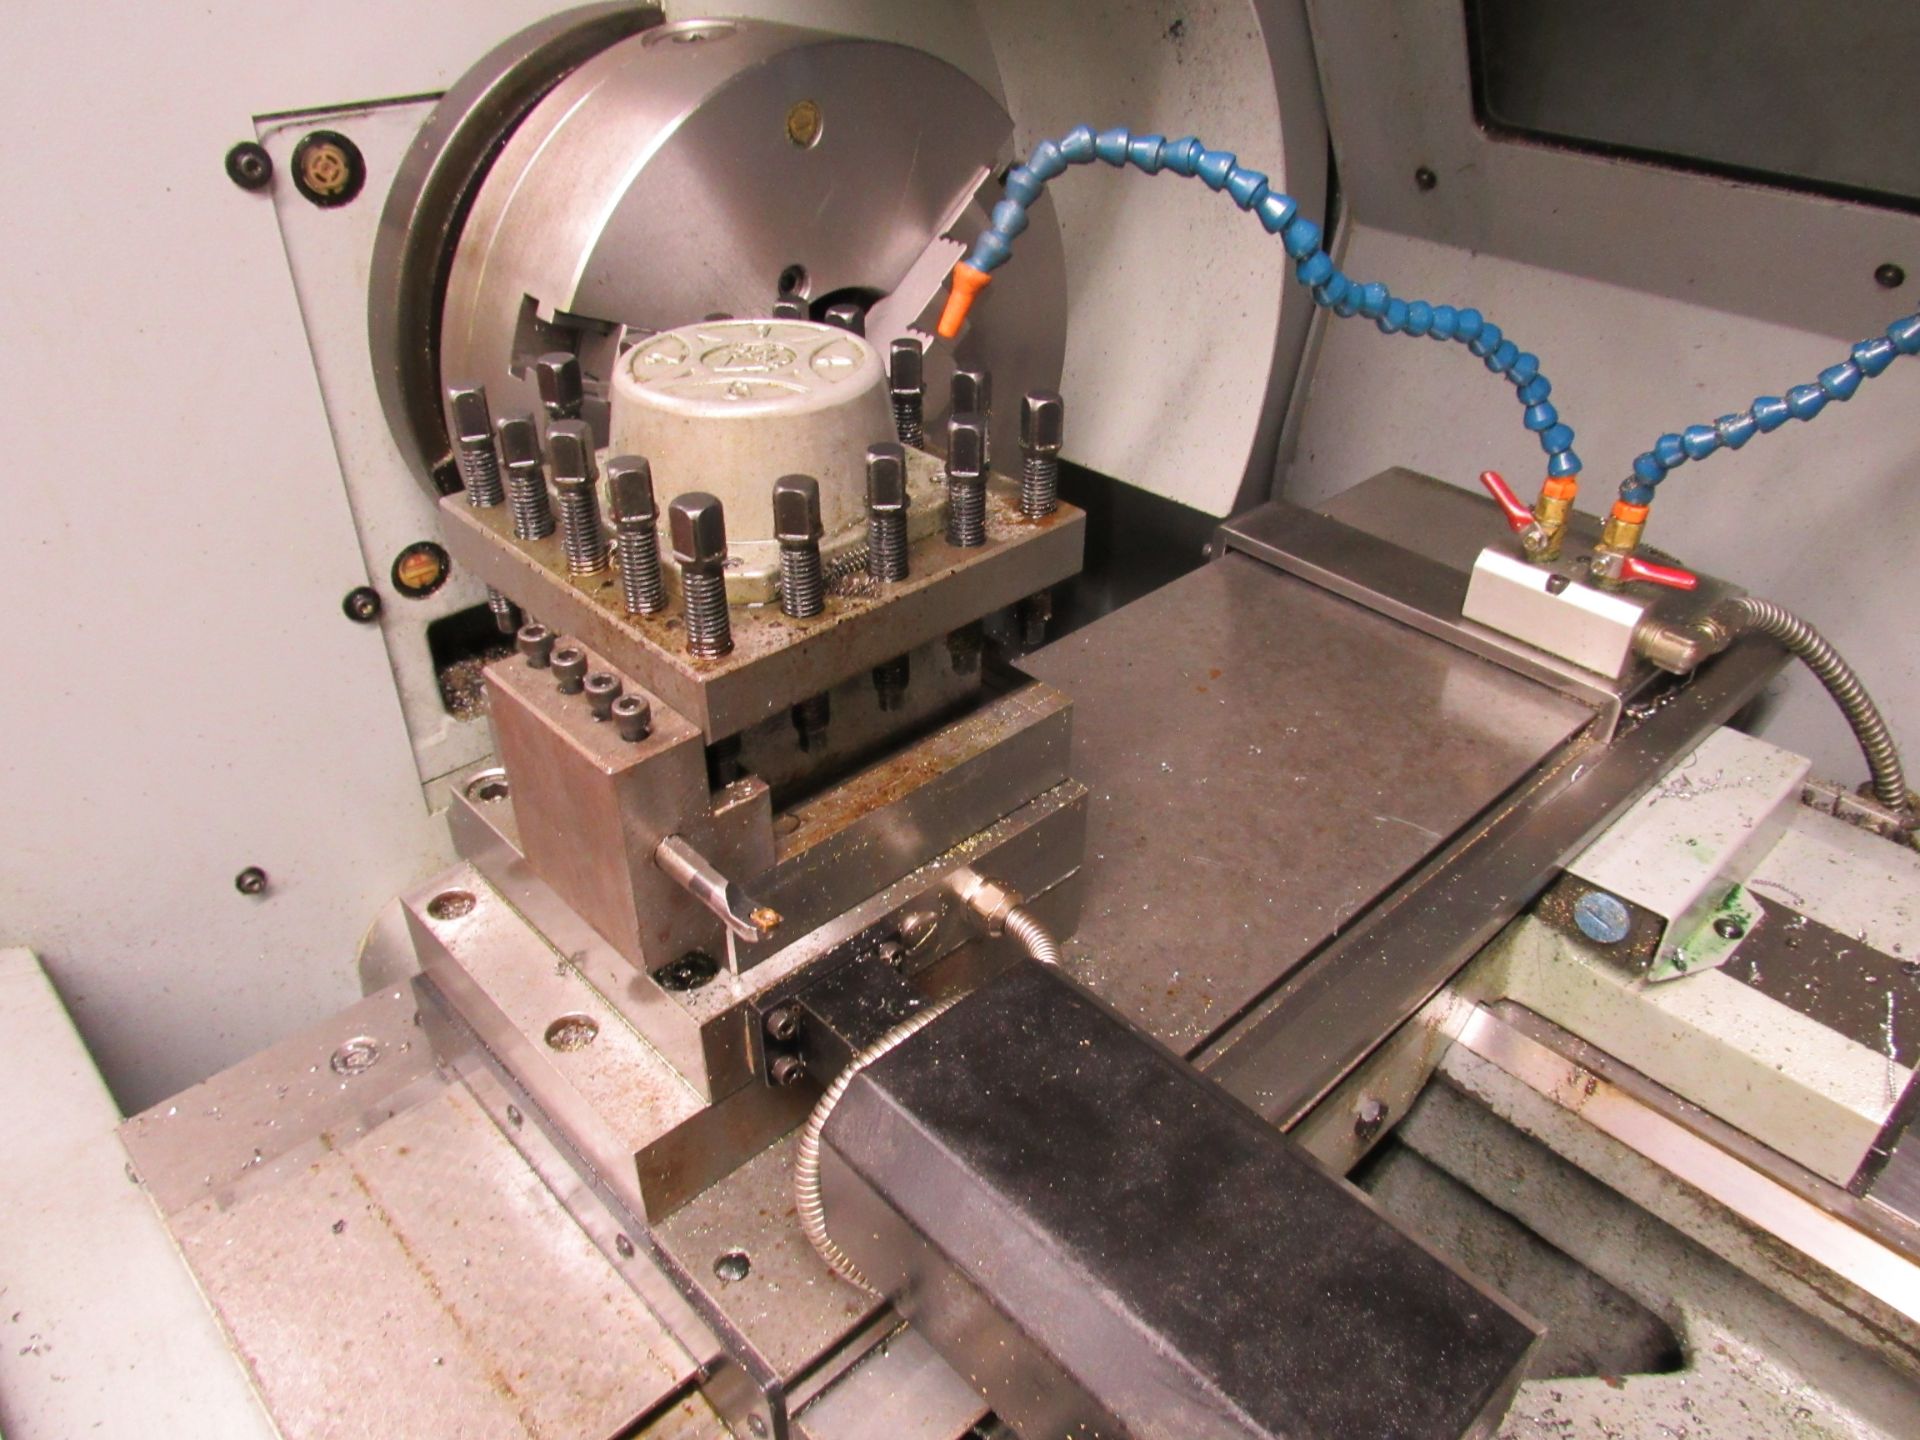 XYZ Machine Tools SLX Proturn 425 x 1.25 Lathe, Year 2013, Serial L634, 16" Bed with 8" Swing, Proto - Image 6 of 8